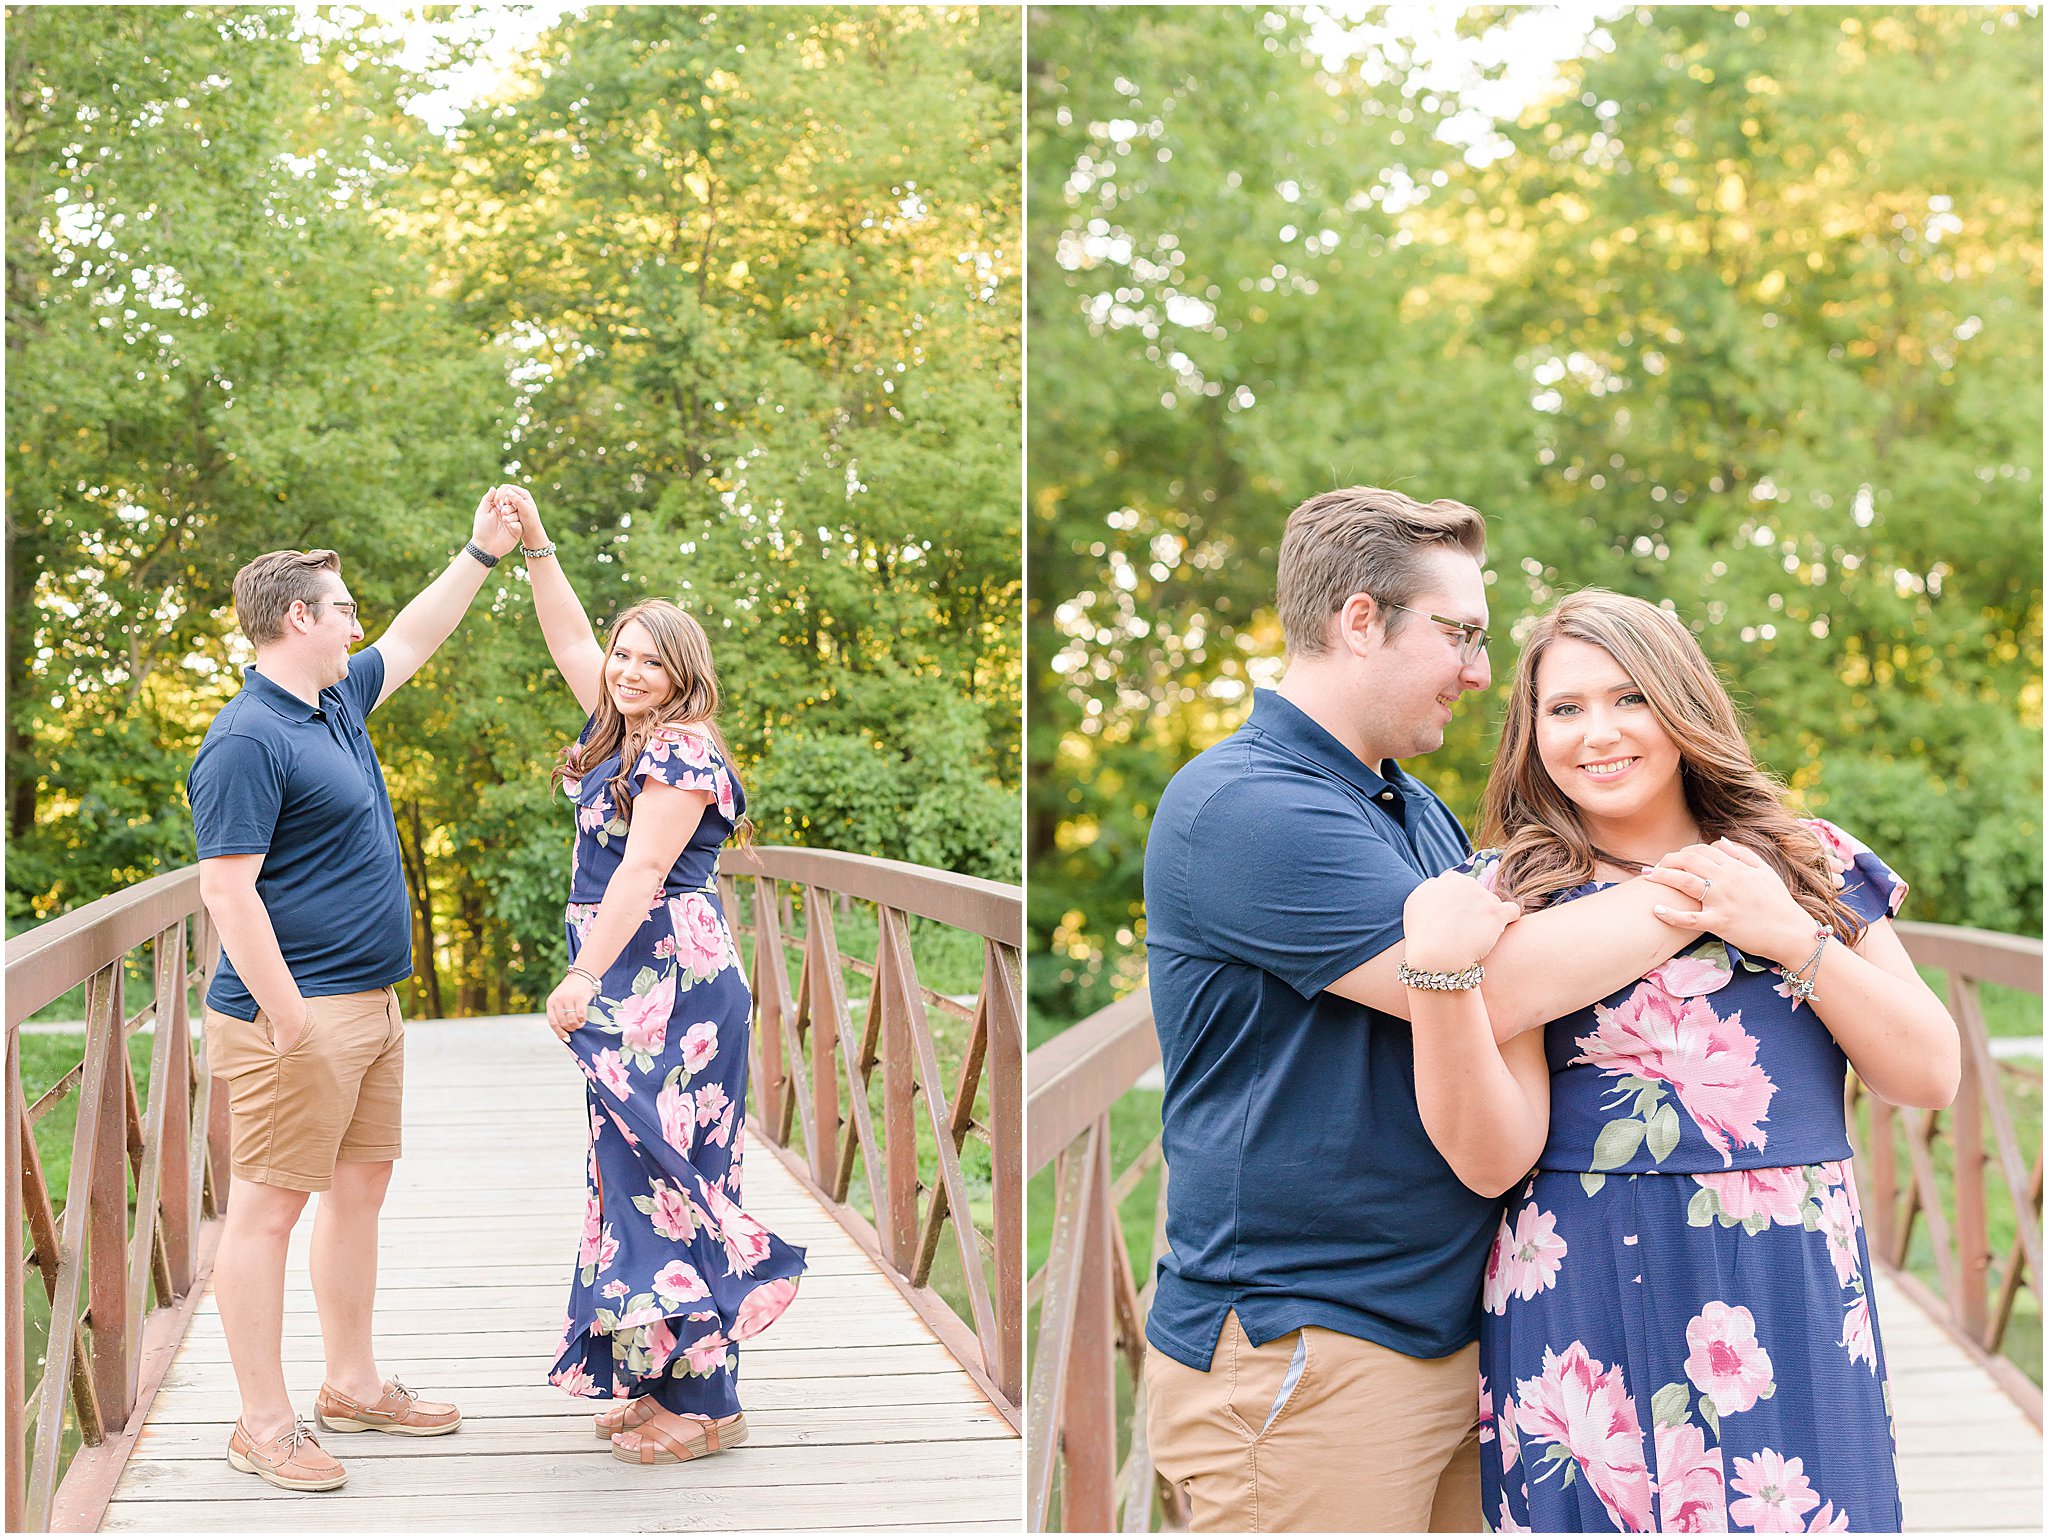 Girl twirling with boyfriend Holcomb Gardens family session